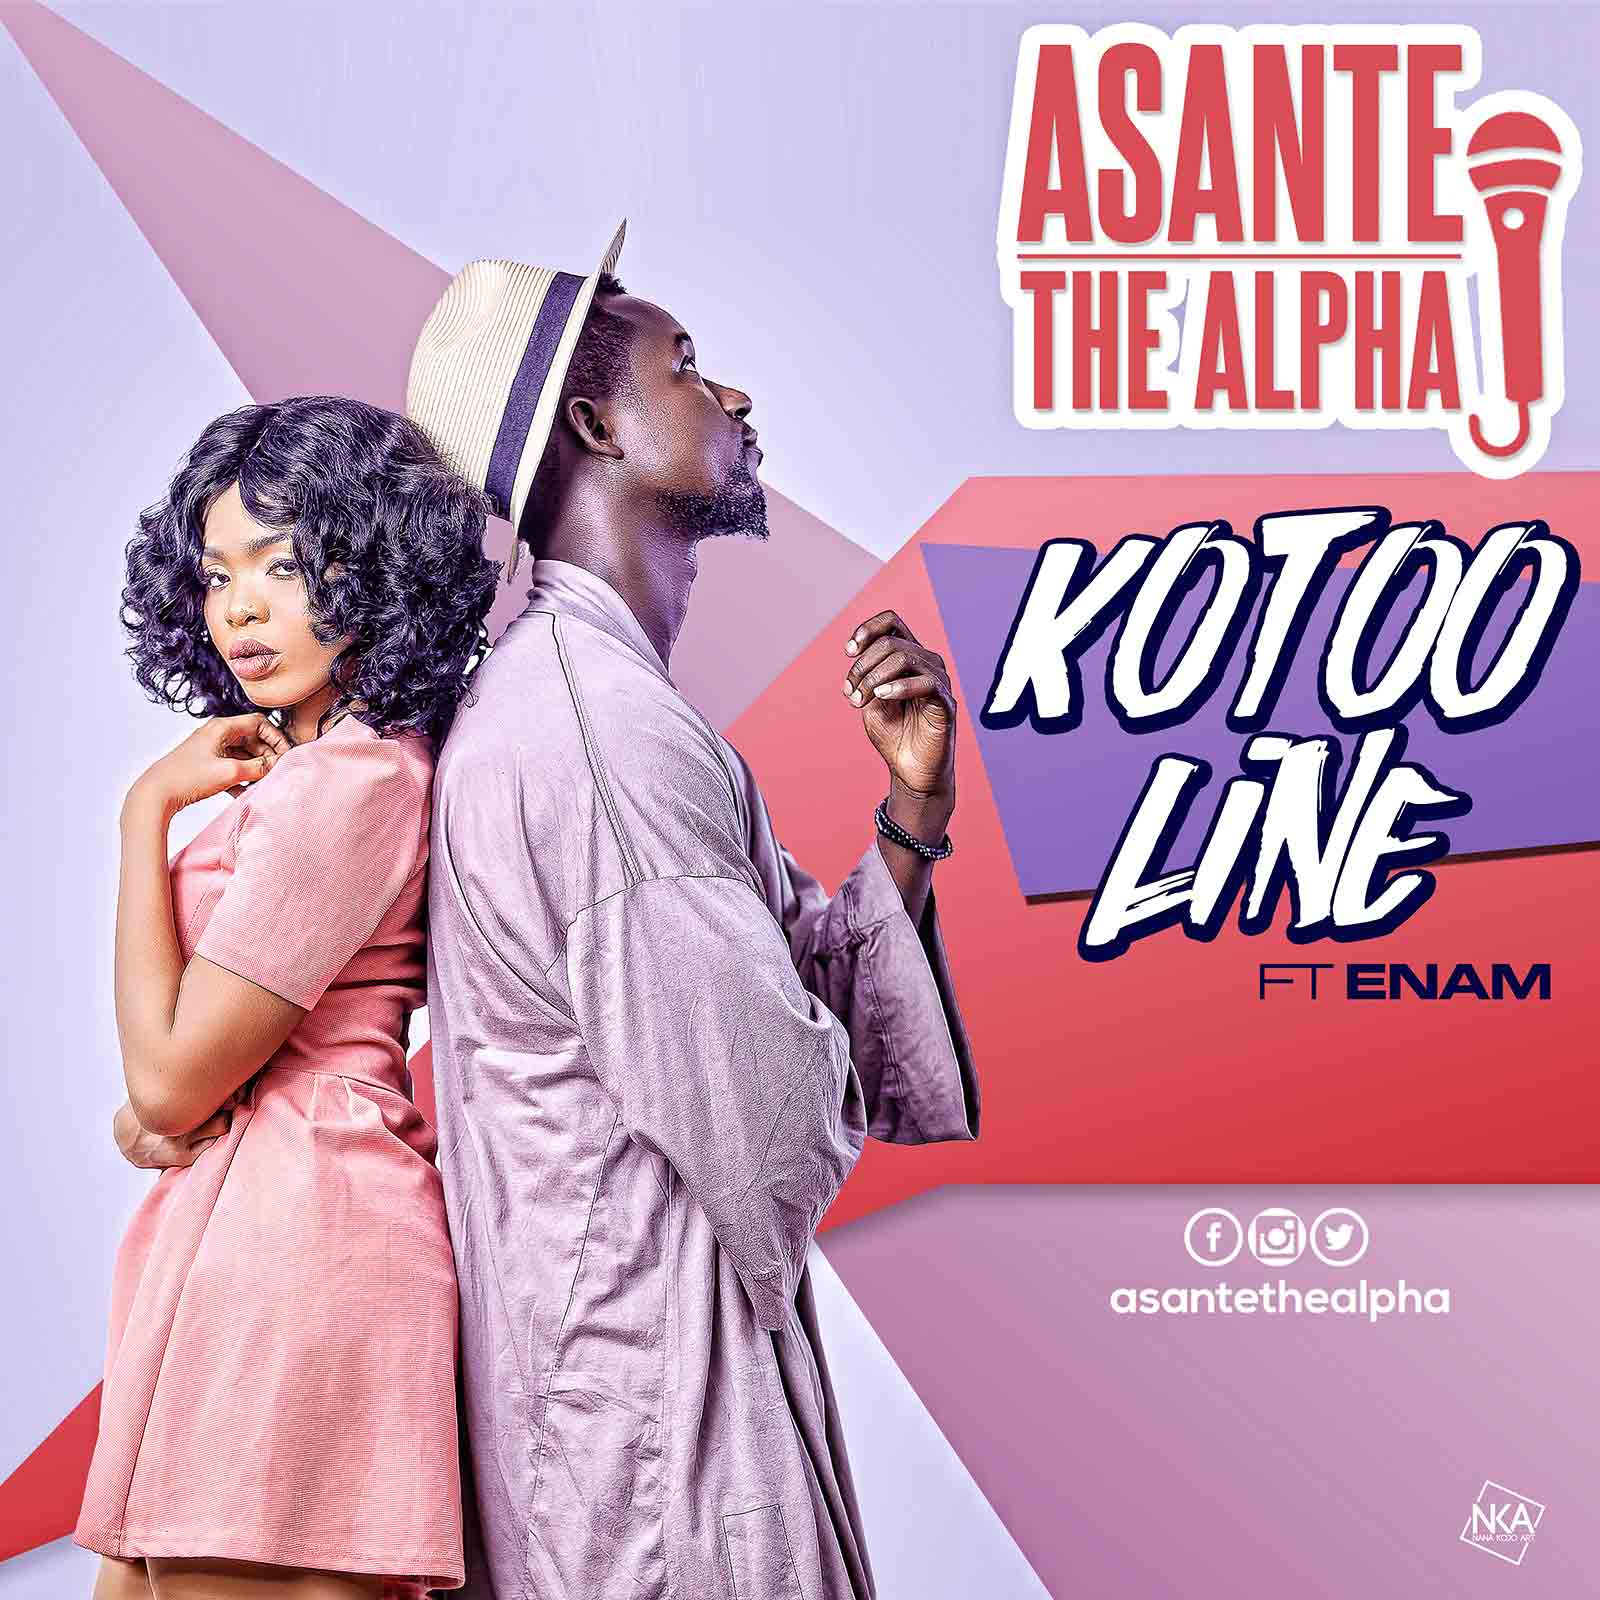 Kotoo Line by Asante The Alpha feat. Enam